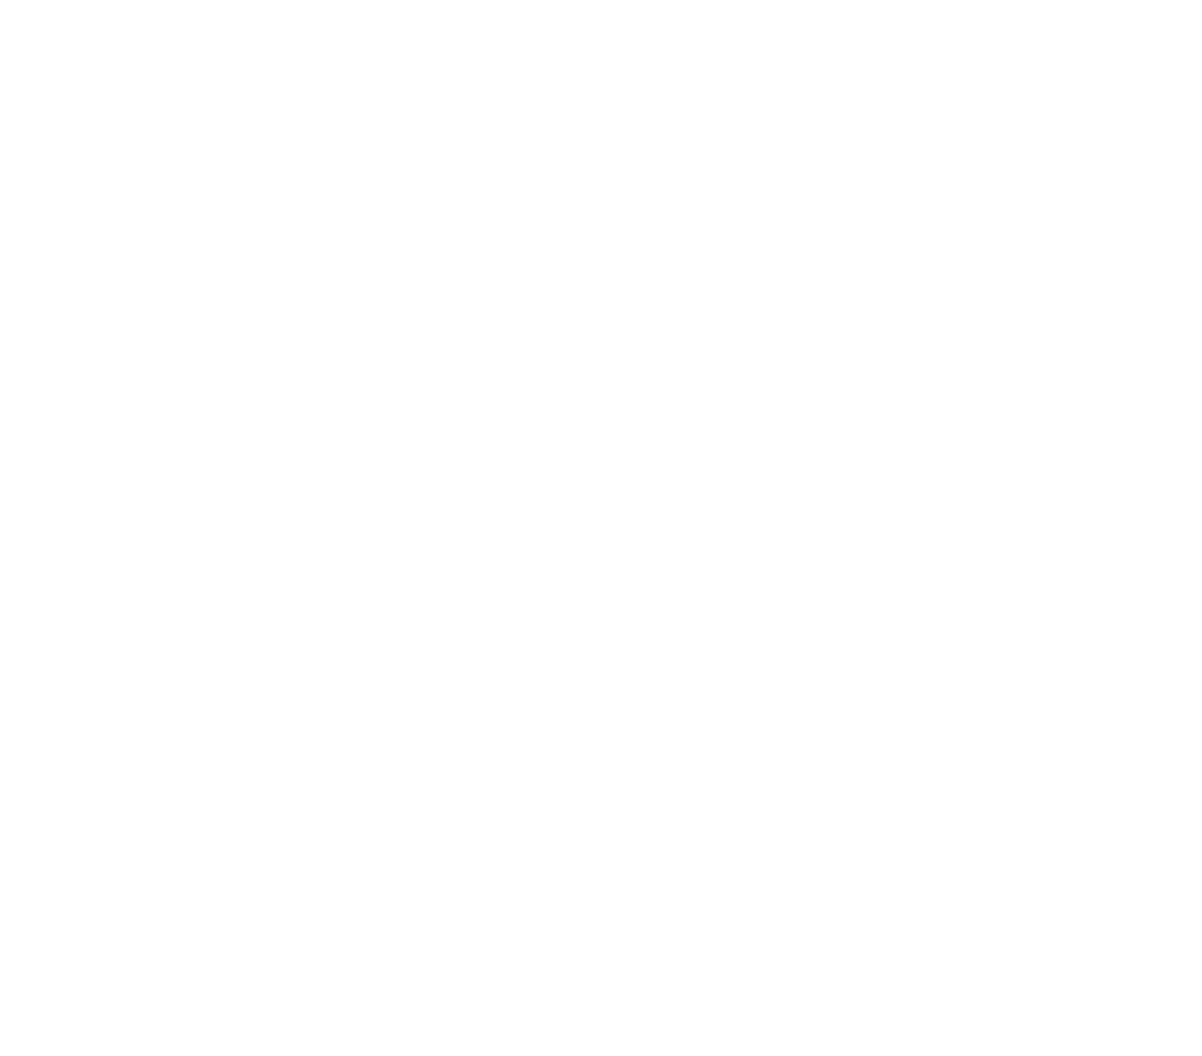 NYT logo, indicating that we analyze data from the New York Times.